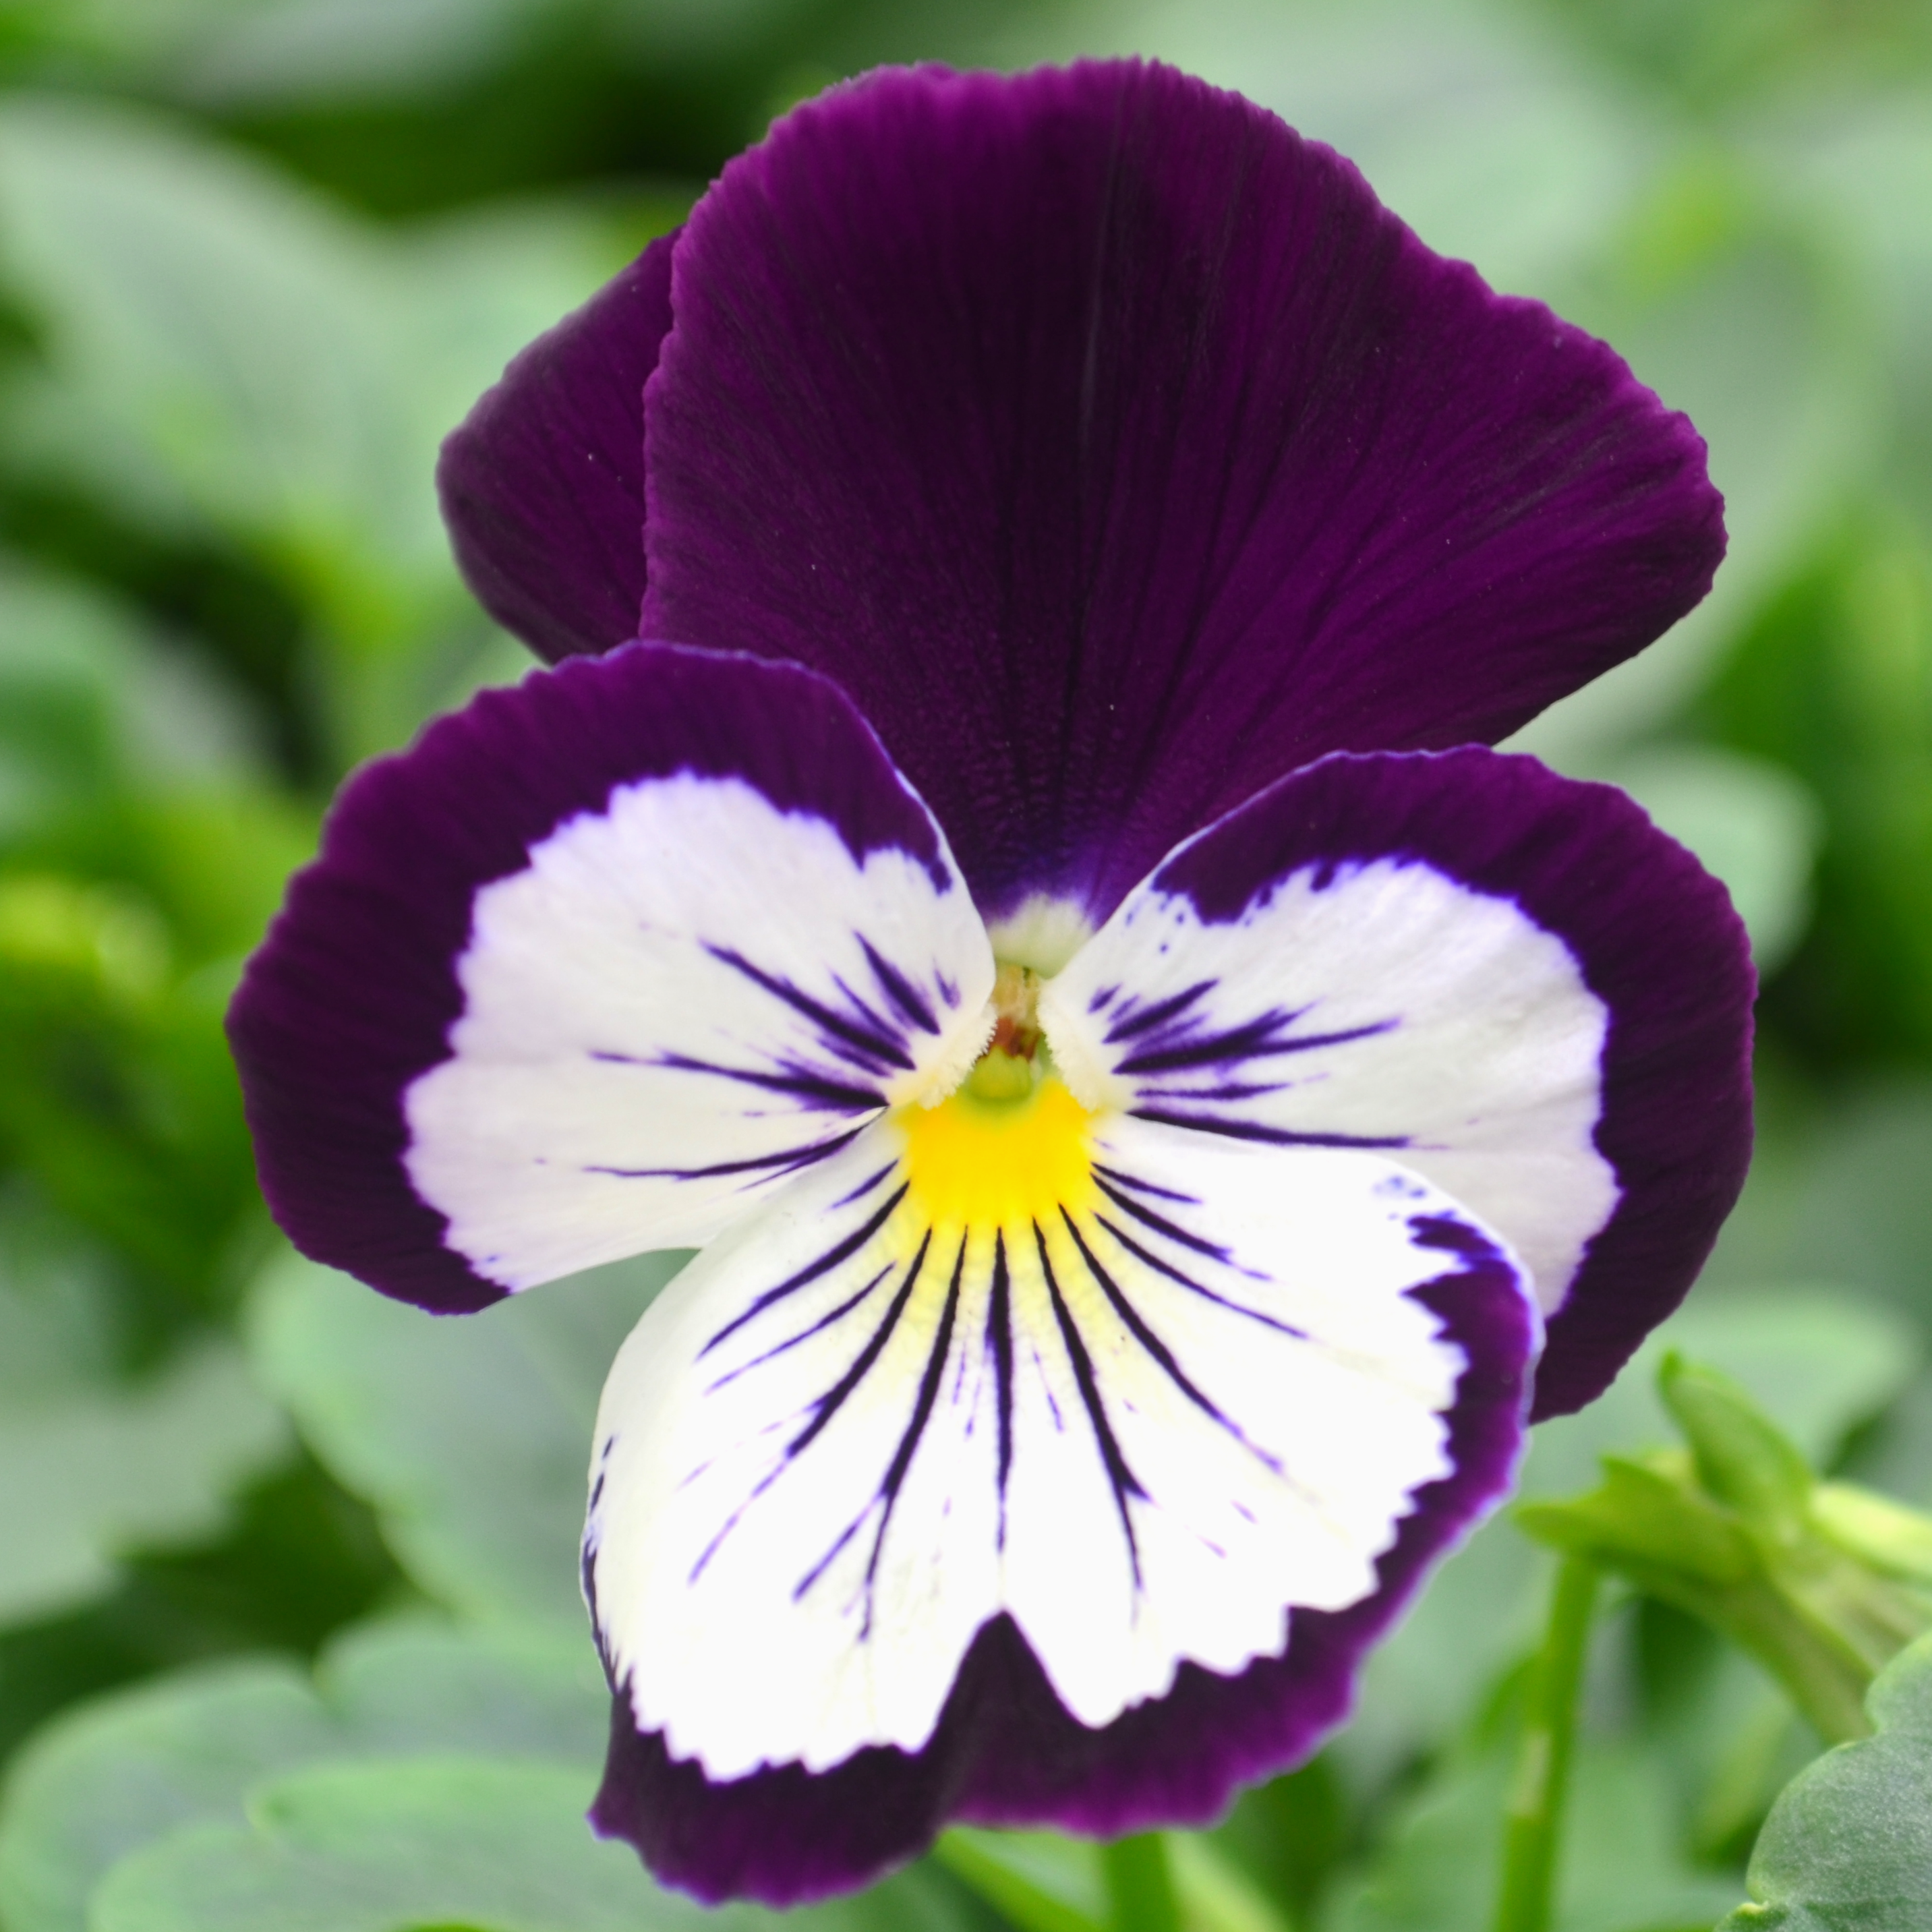 Viola wittrockiana Cats Plus 'Purple White' - Pansy from Hillcrest Nursery